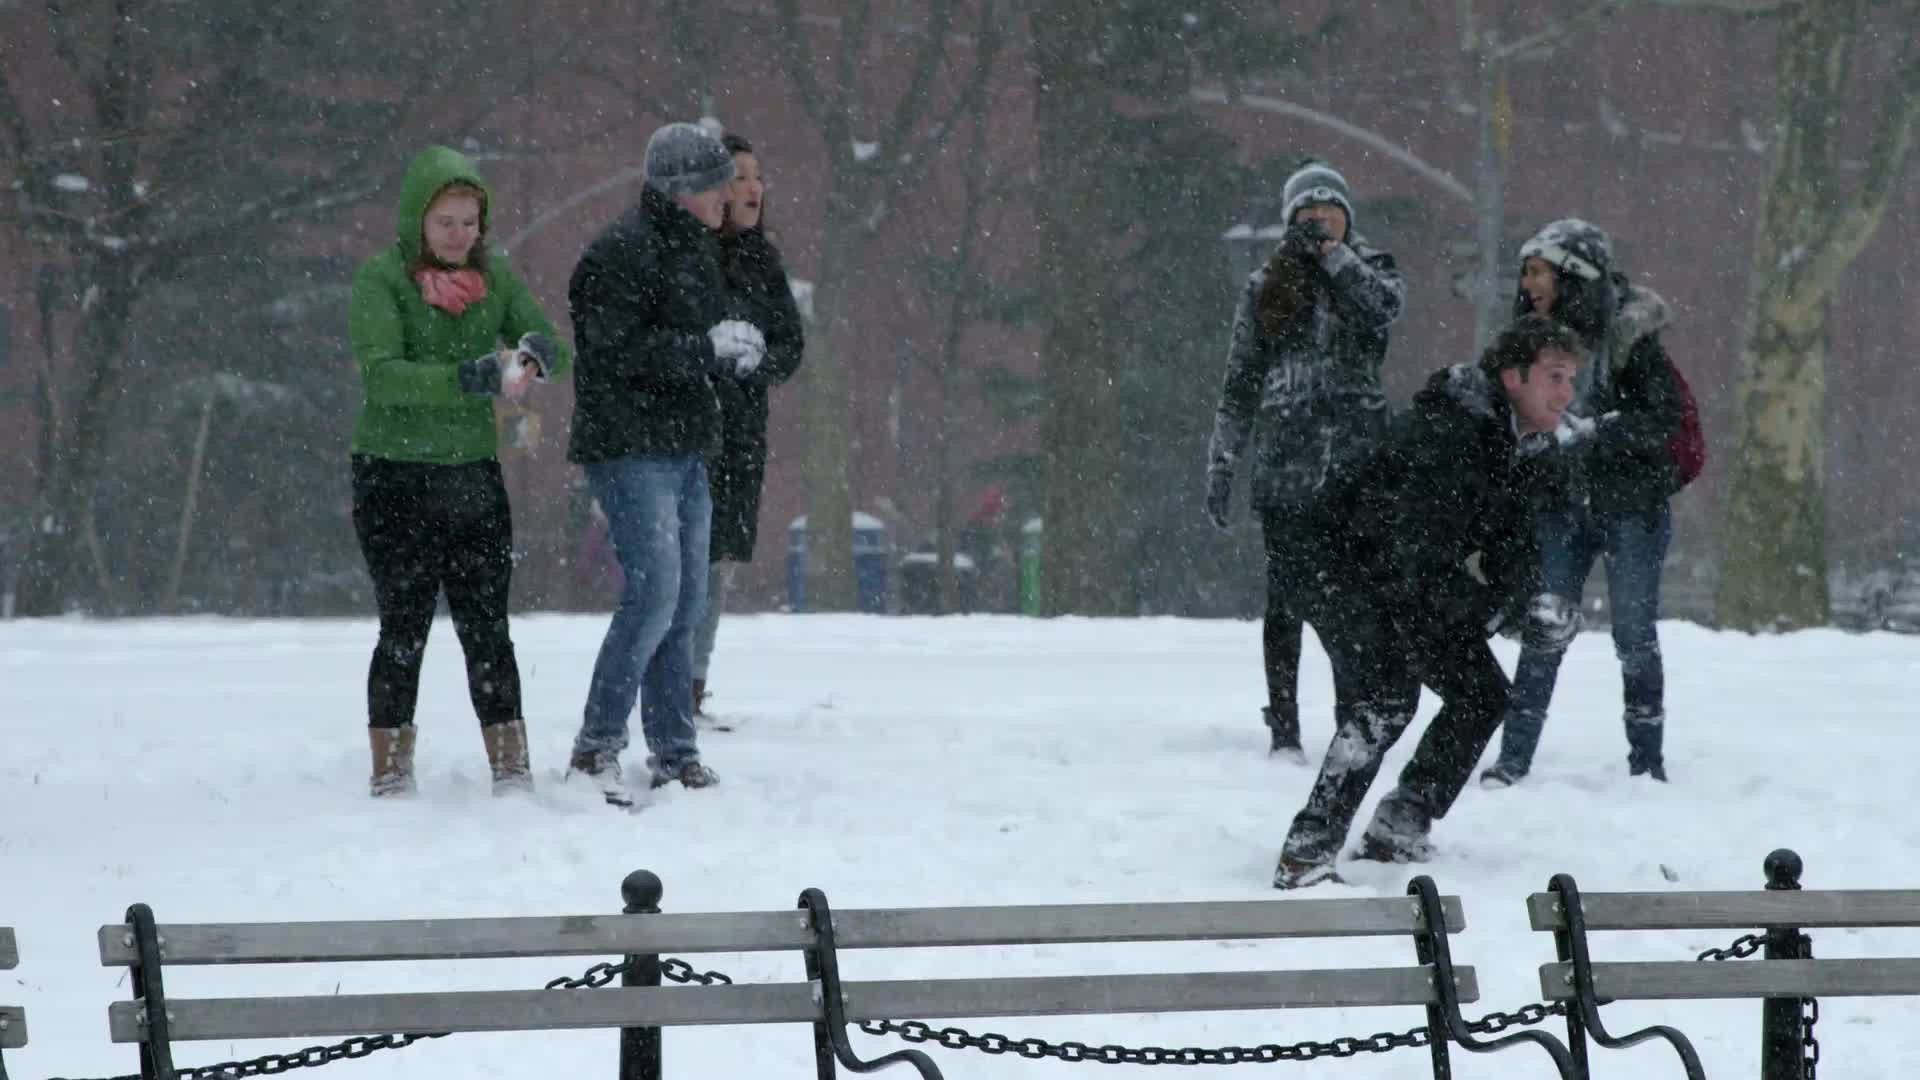 girl throwing snowball in winter blizzard Washington Square Park snowing slow motion 4K